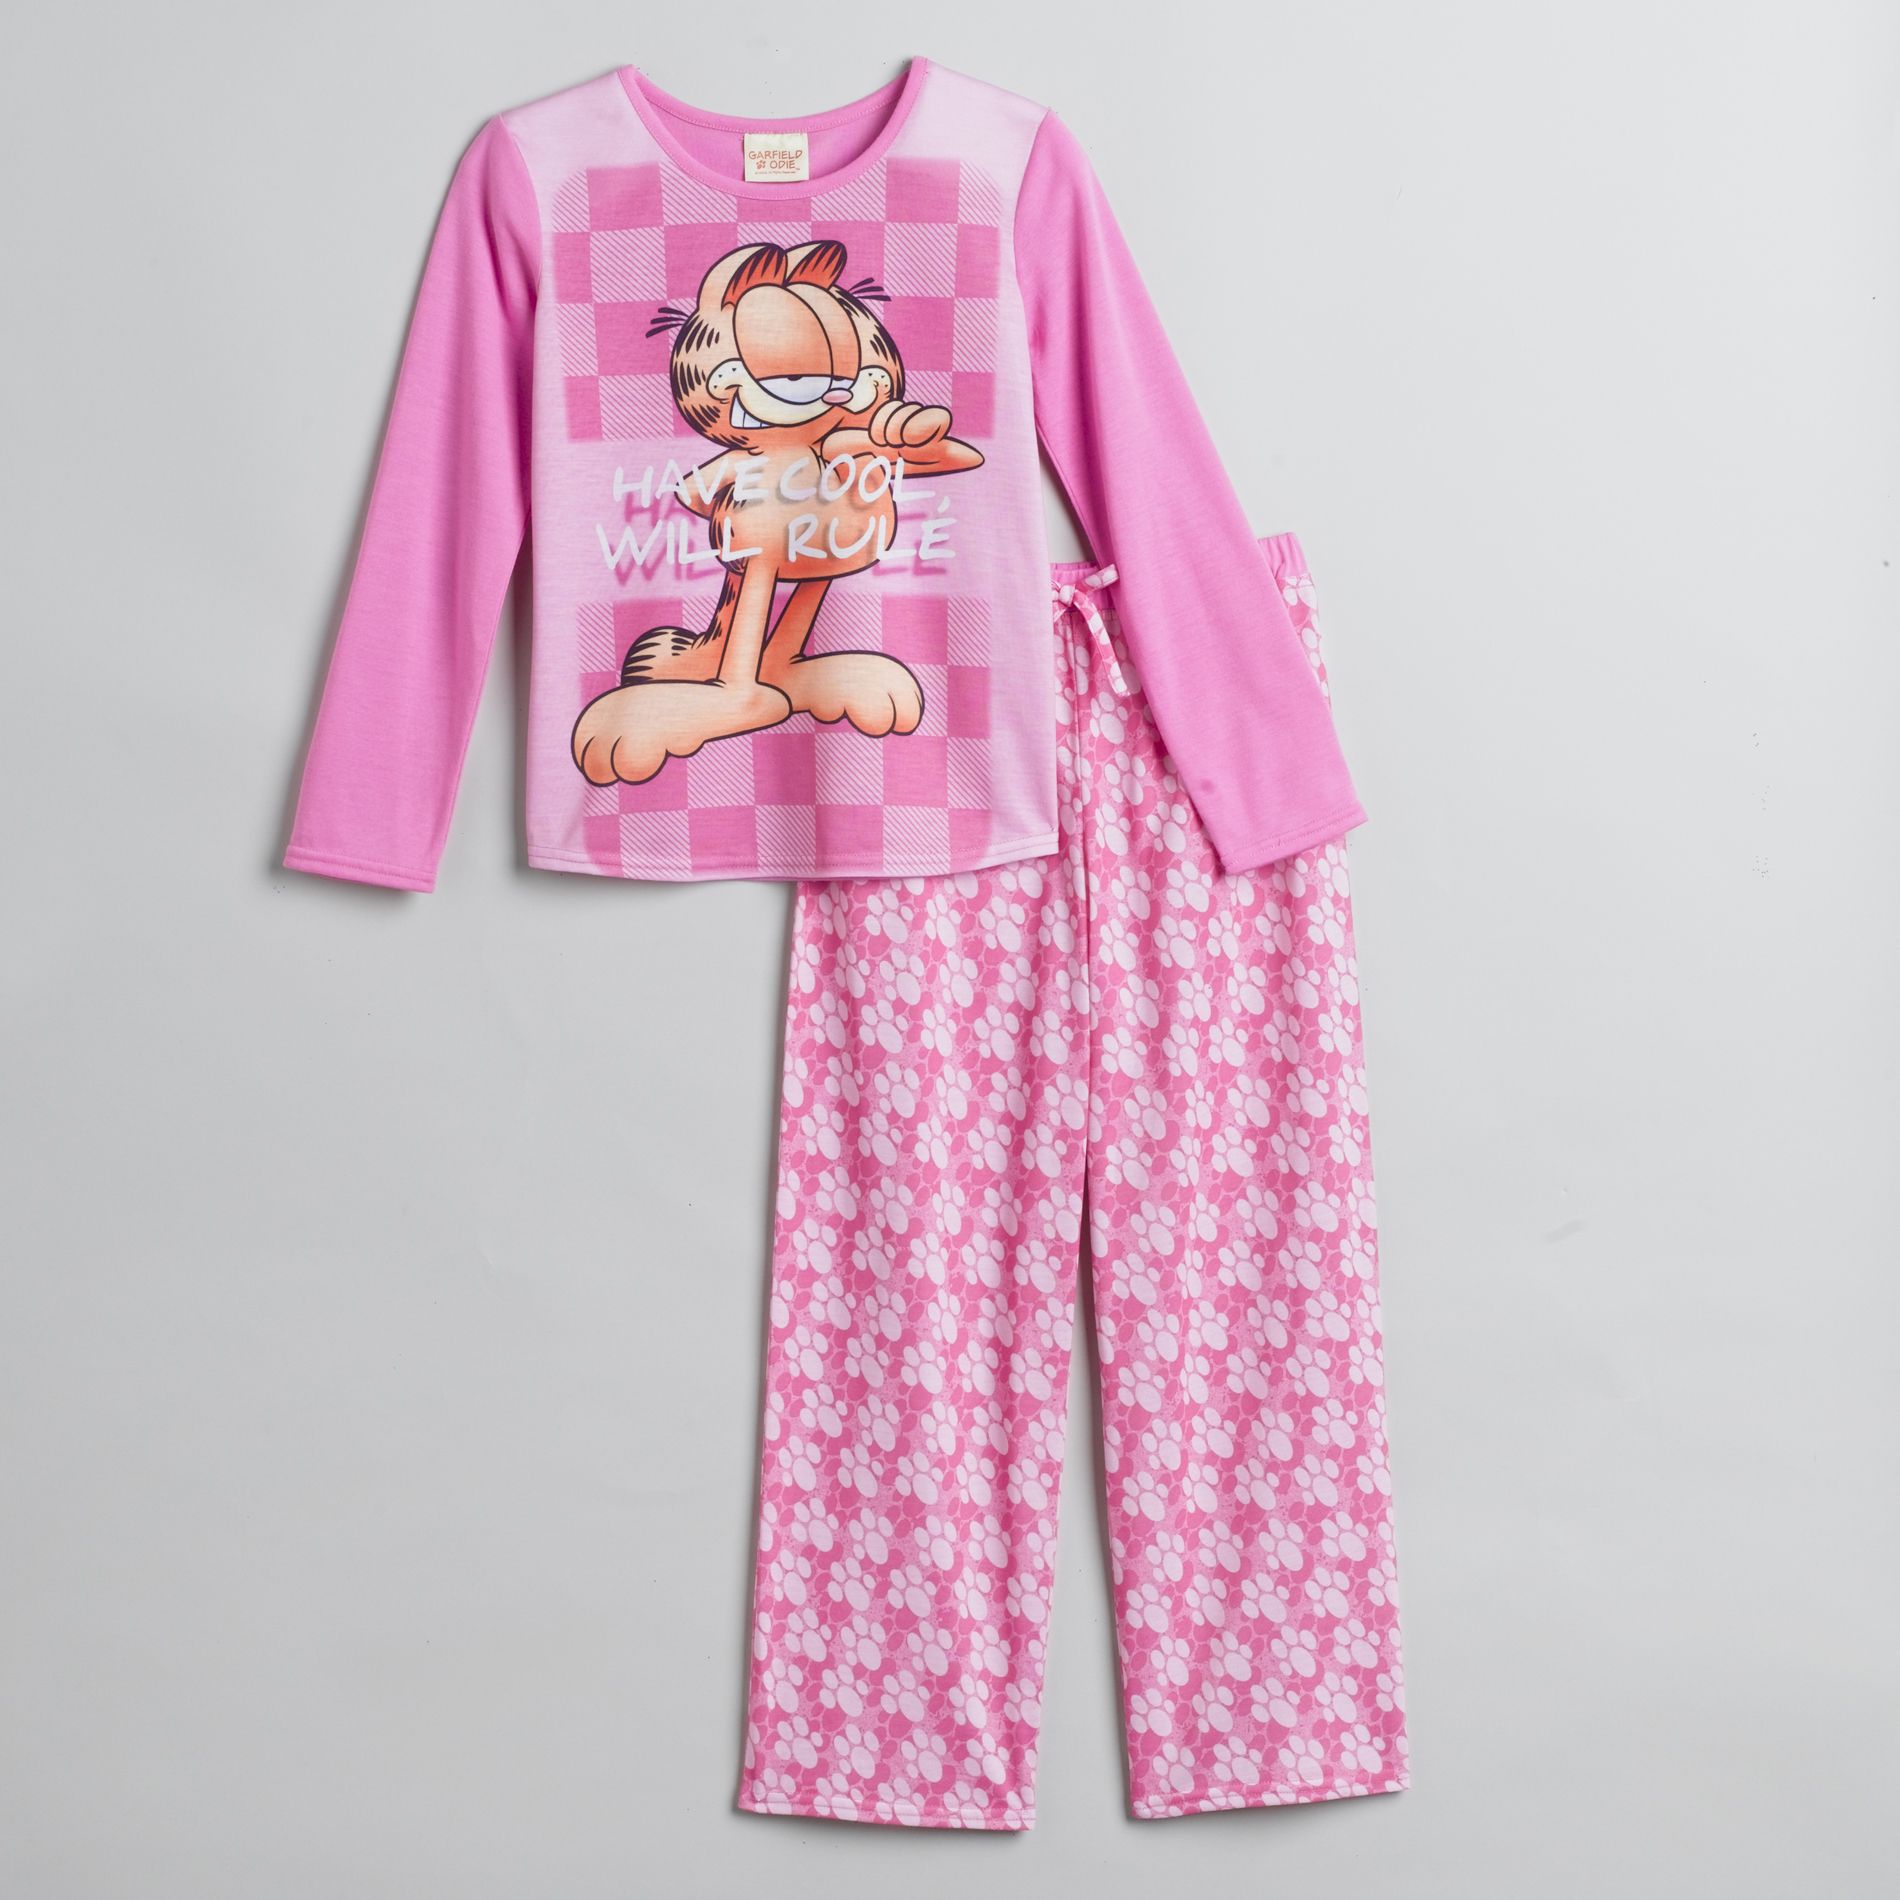 Garfield Girl's Have Cool Will Rule Graphic Pajamas